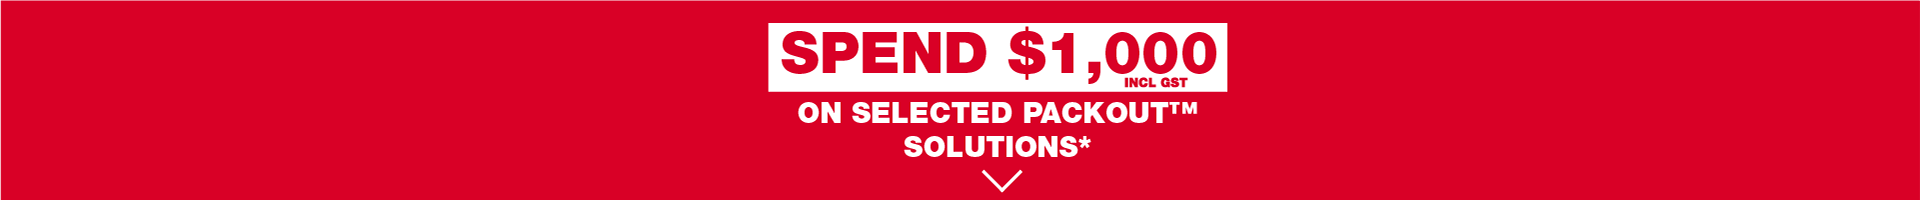 Spend $1000 on selected PACKOUT Solutions